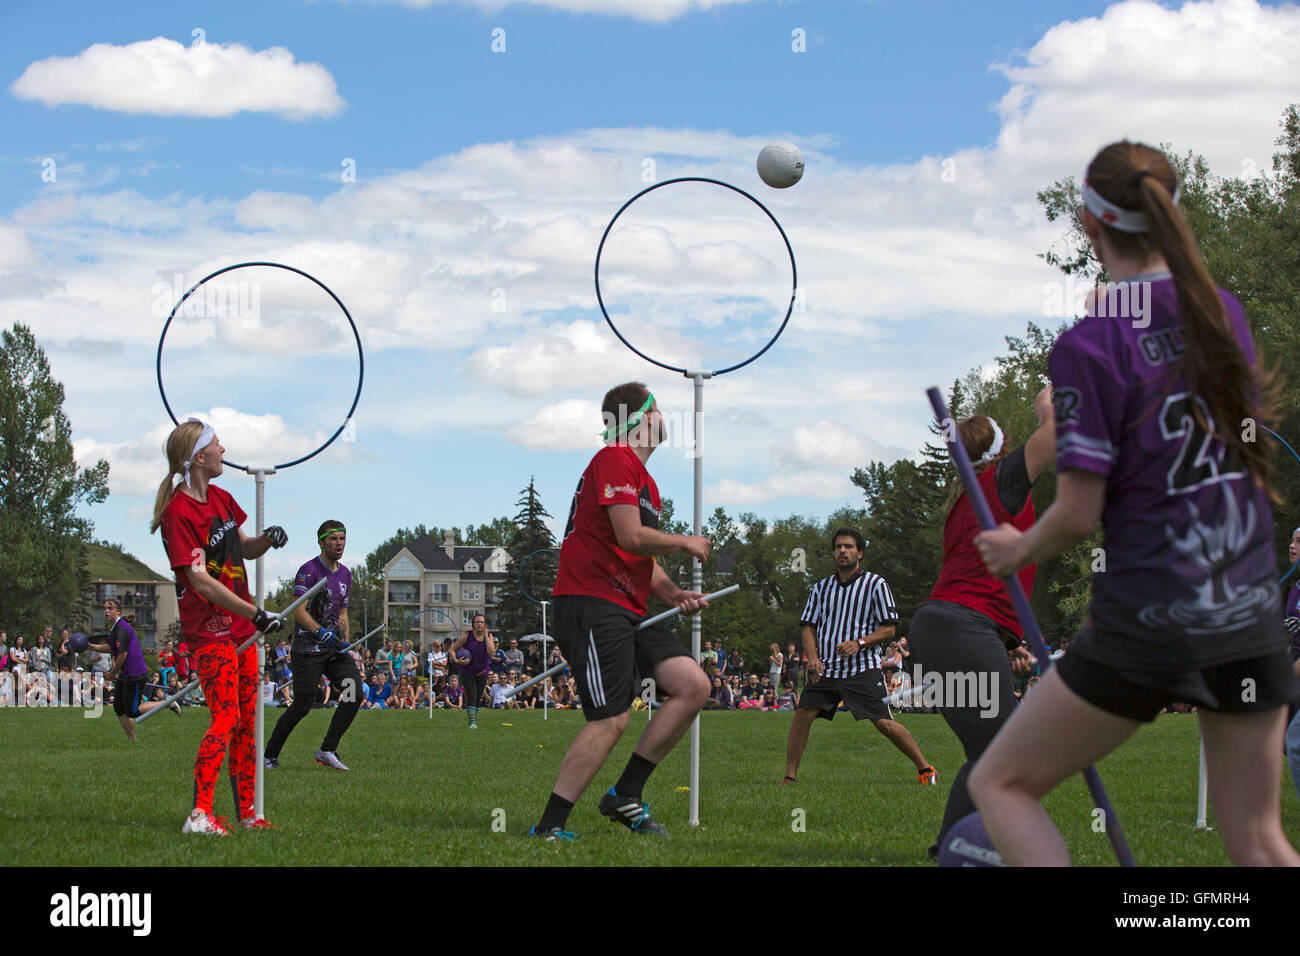 Calgary, Canada. 31st July, 2016. Quidditch ball heads towards goal post during match between University of Calgary Mudbloods and Calgary Kelpies in Riley Park celebrating Harry Potter's Birthday. Credit: Rosanne Tackaberry/Alamy Live News. Stock Photo